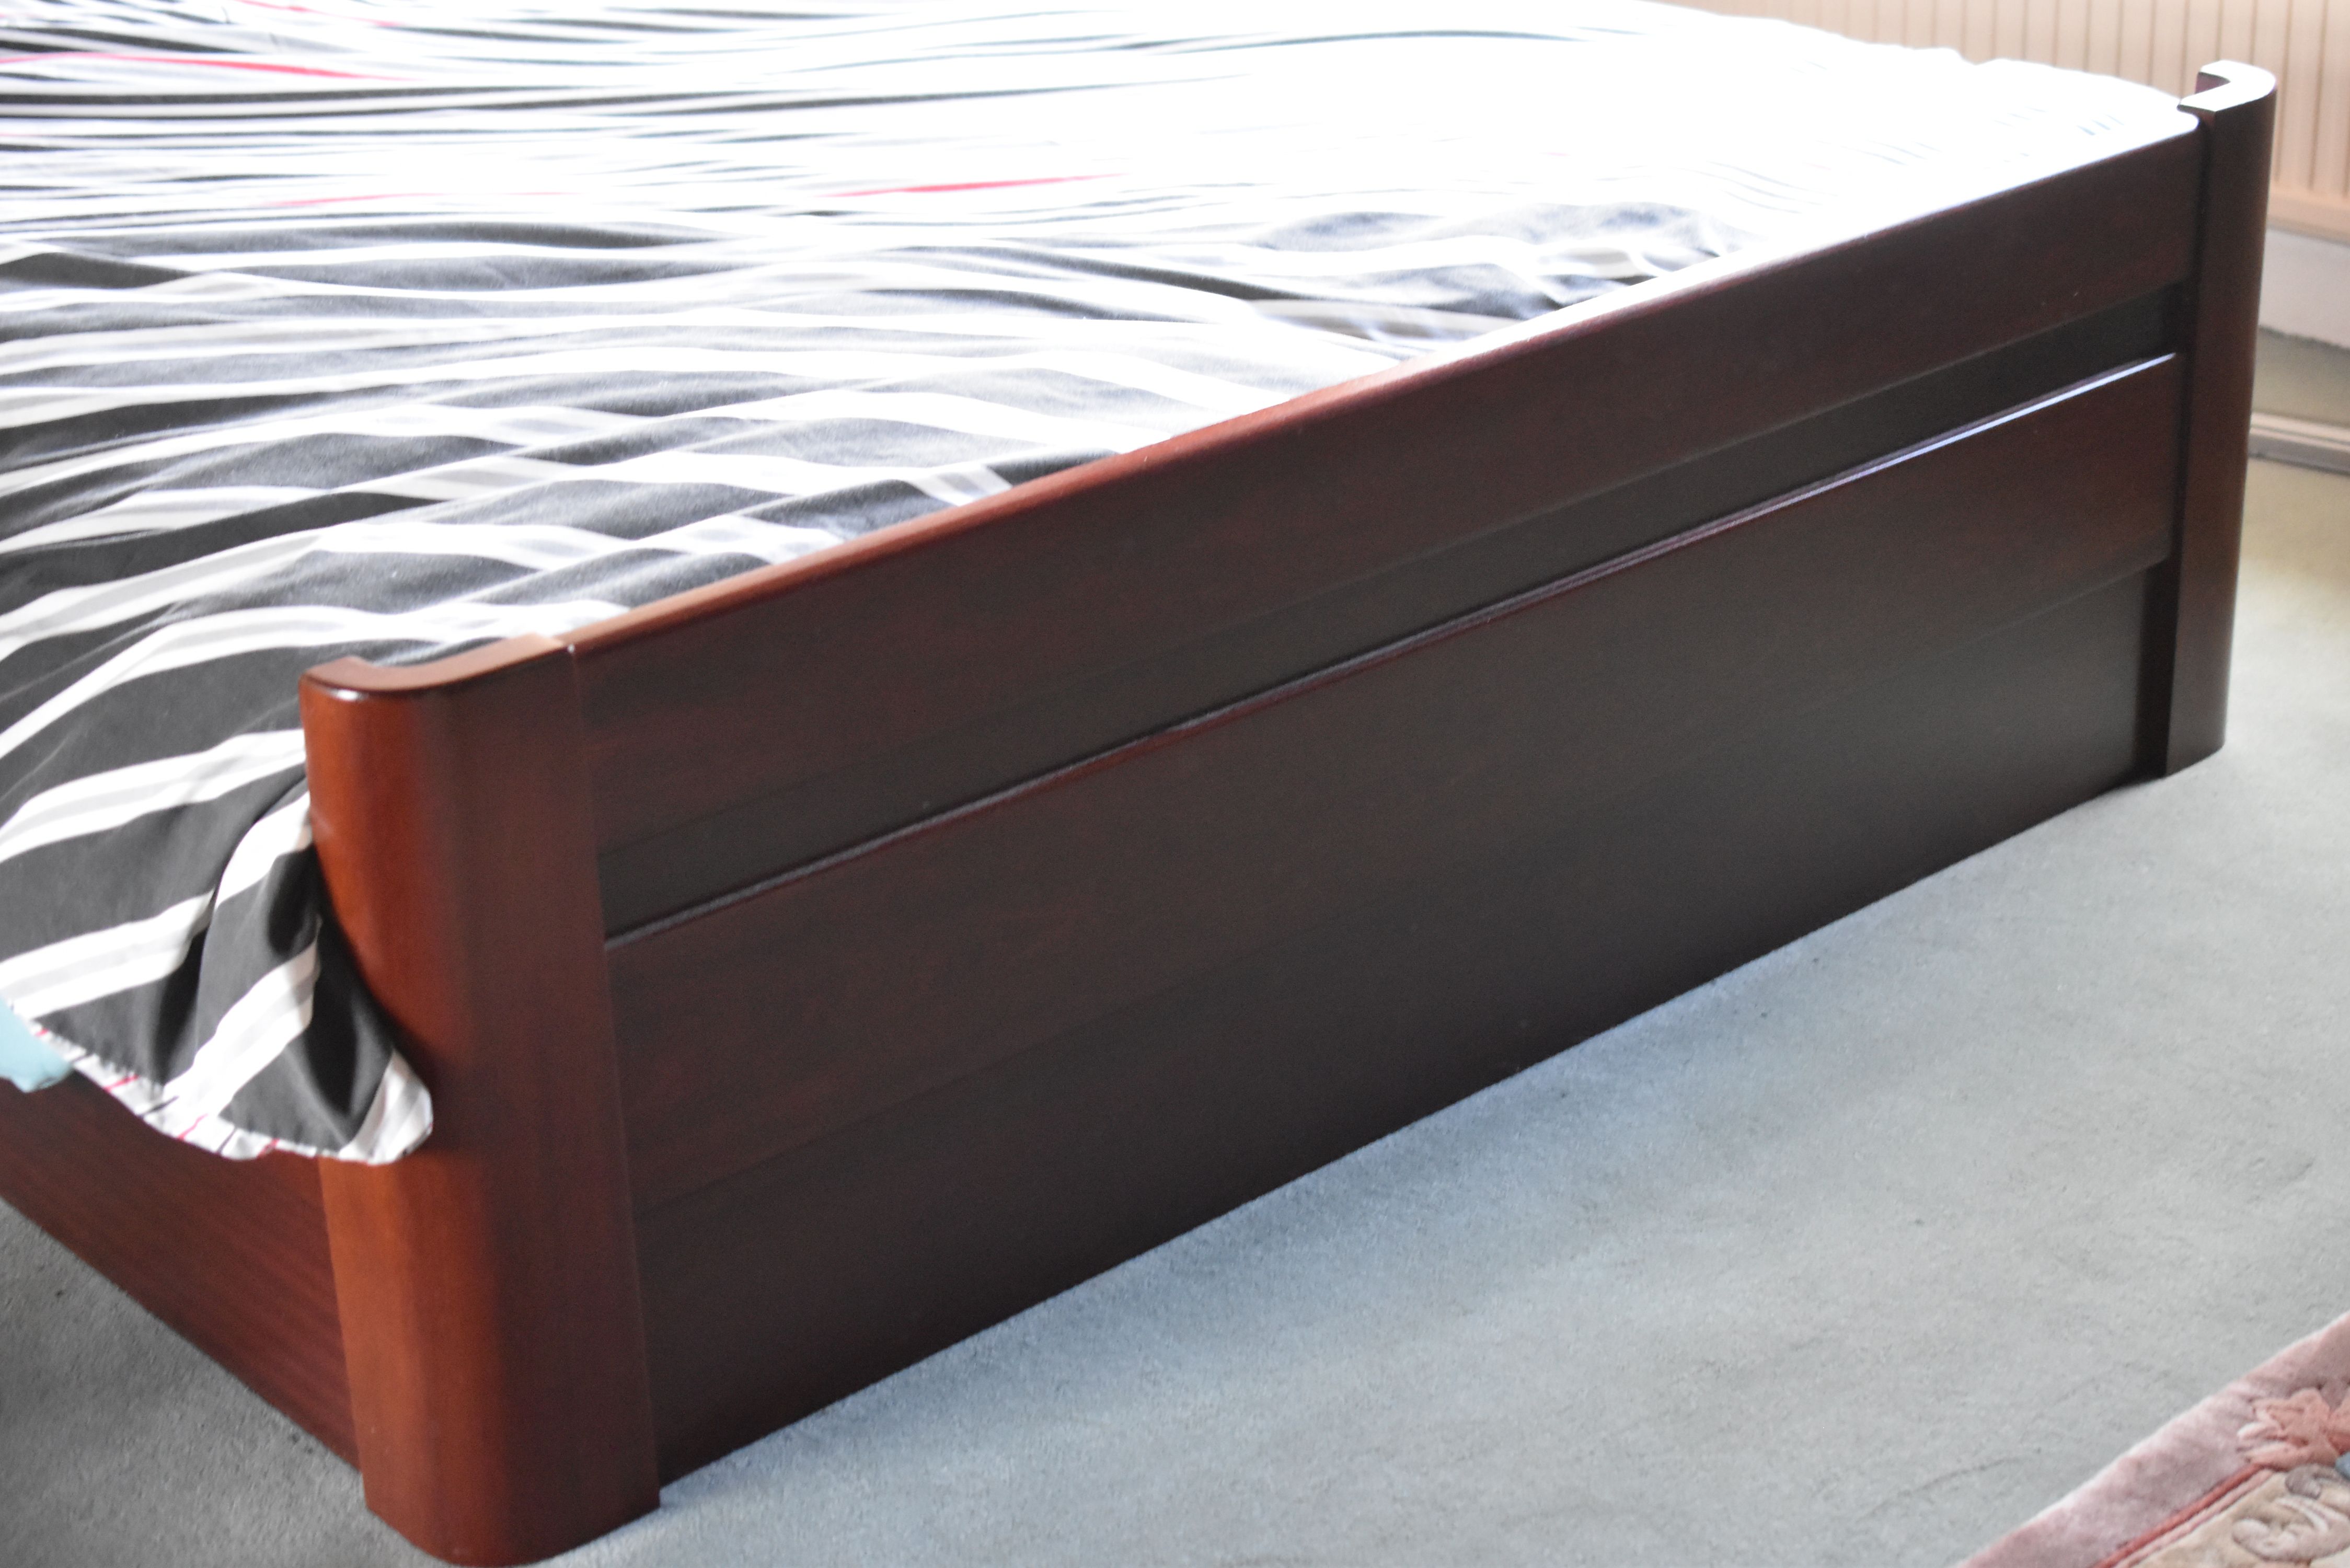 A DANISH ROSEWOOD DOUBLE BED FRAME - Image 2 of 2